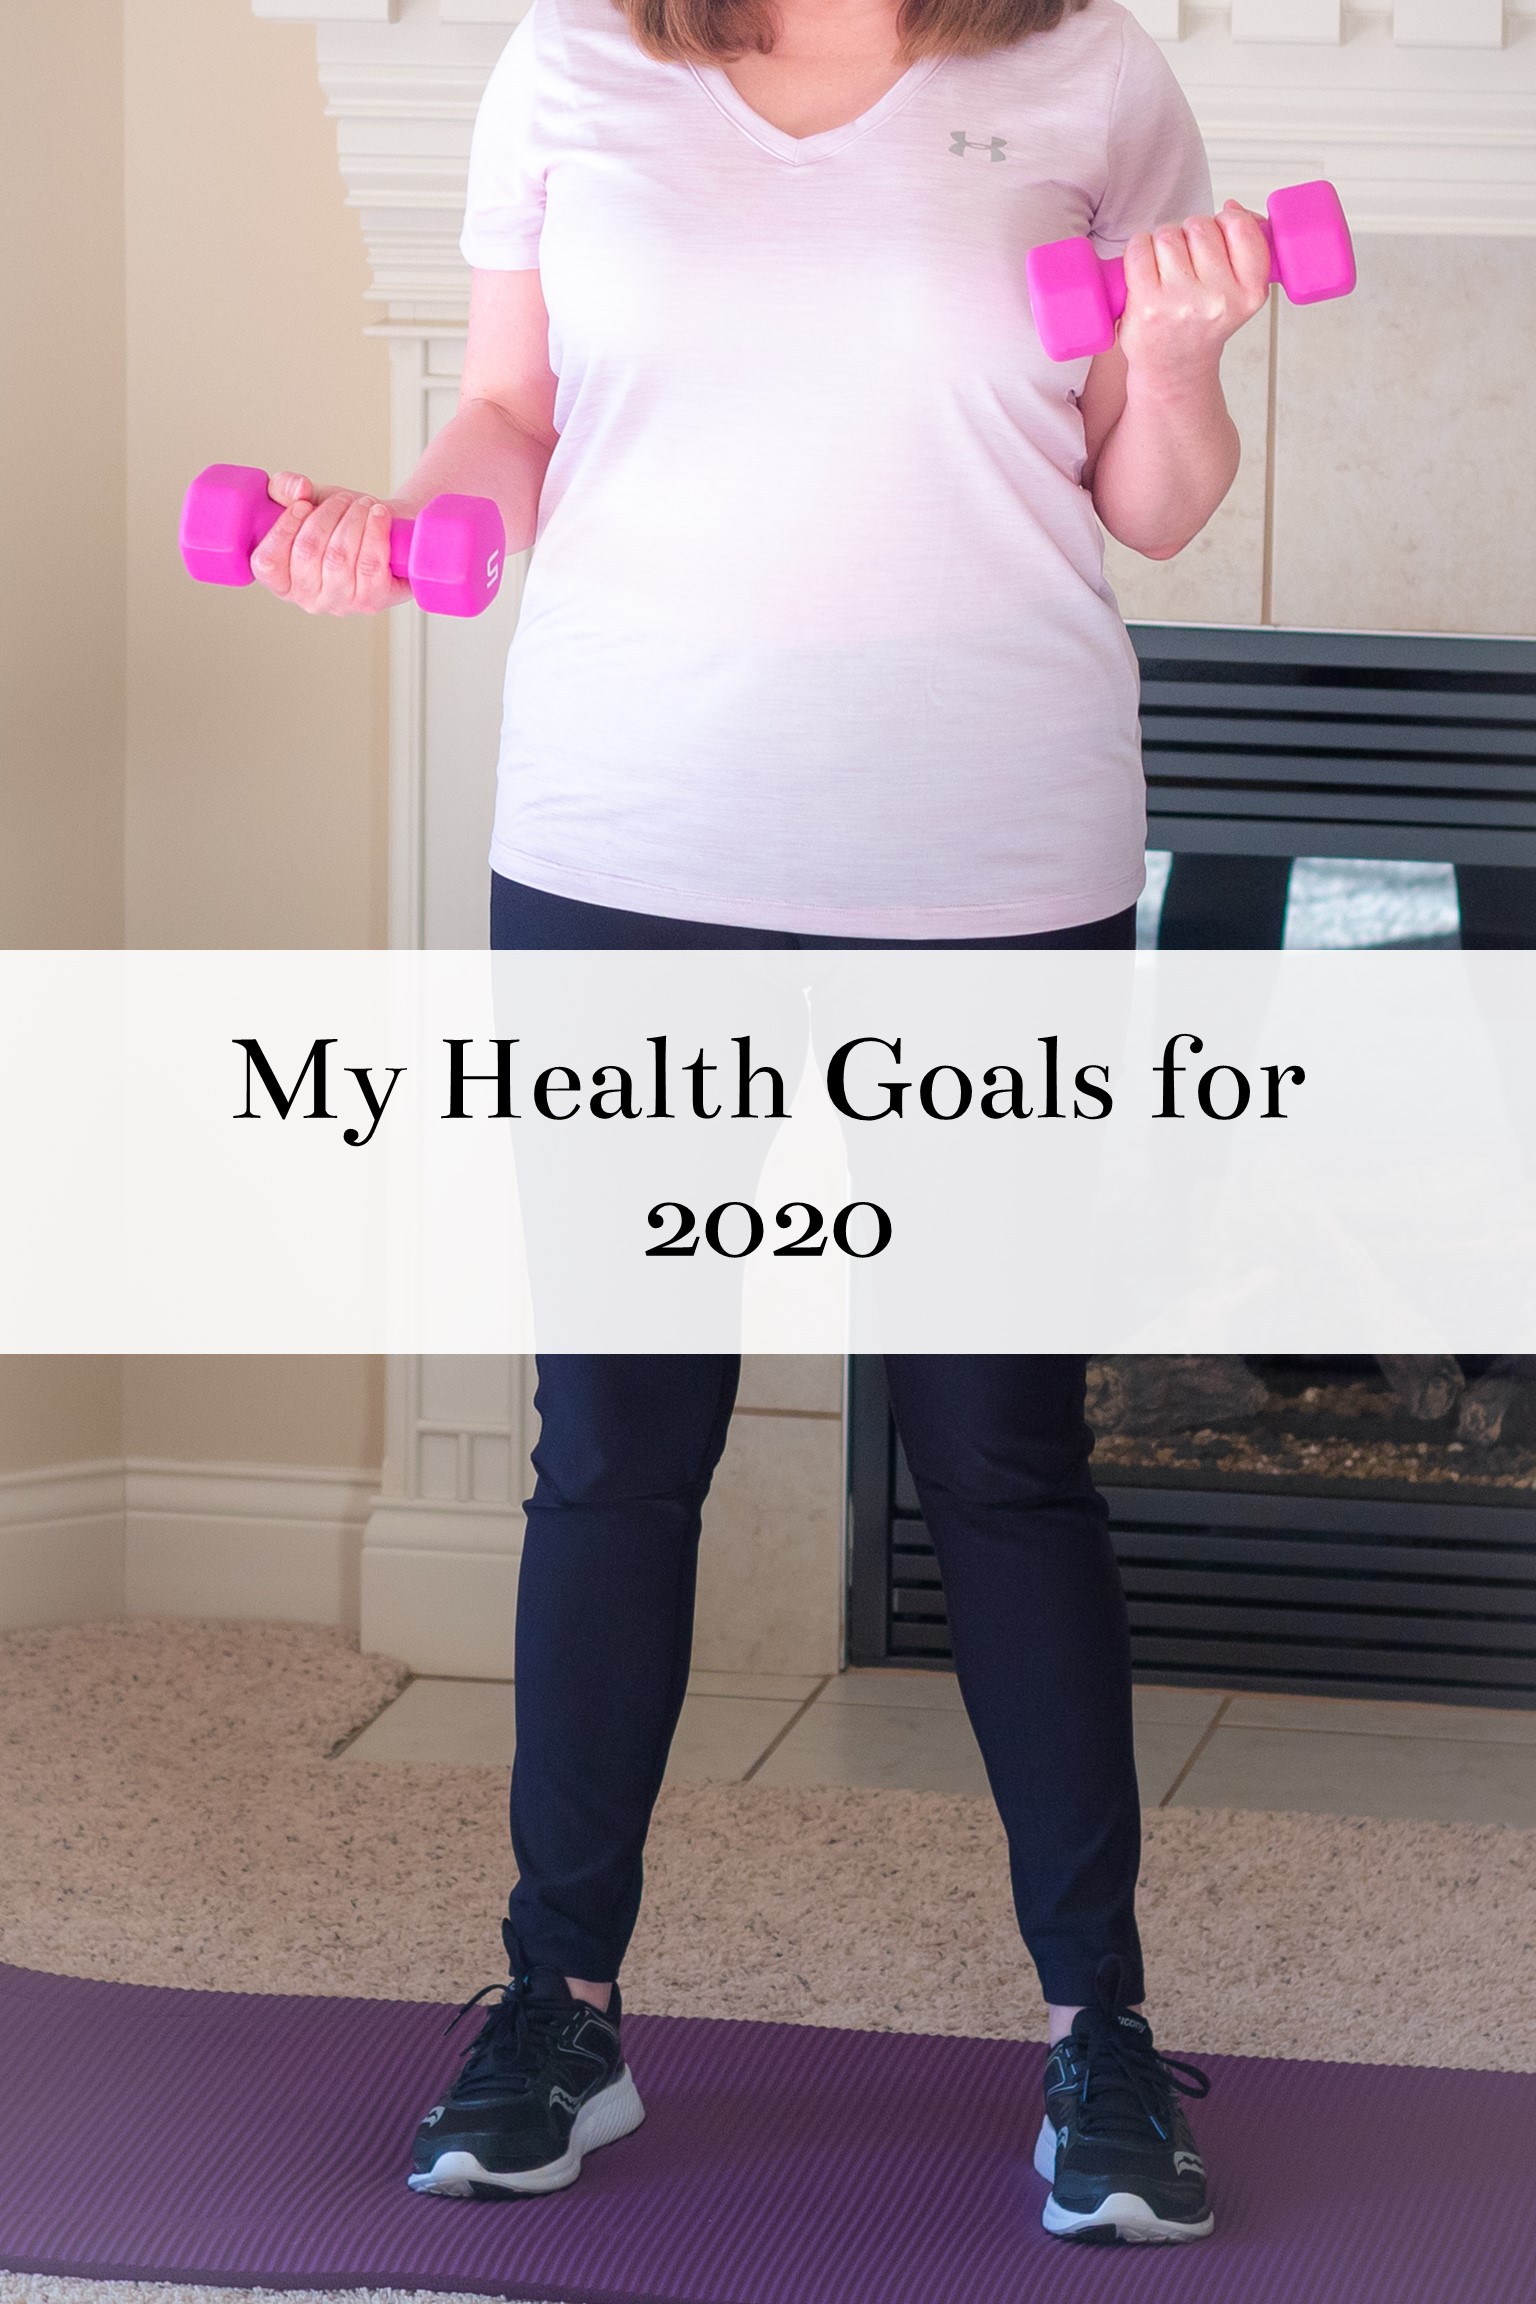 My Health Goals for 2020